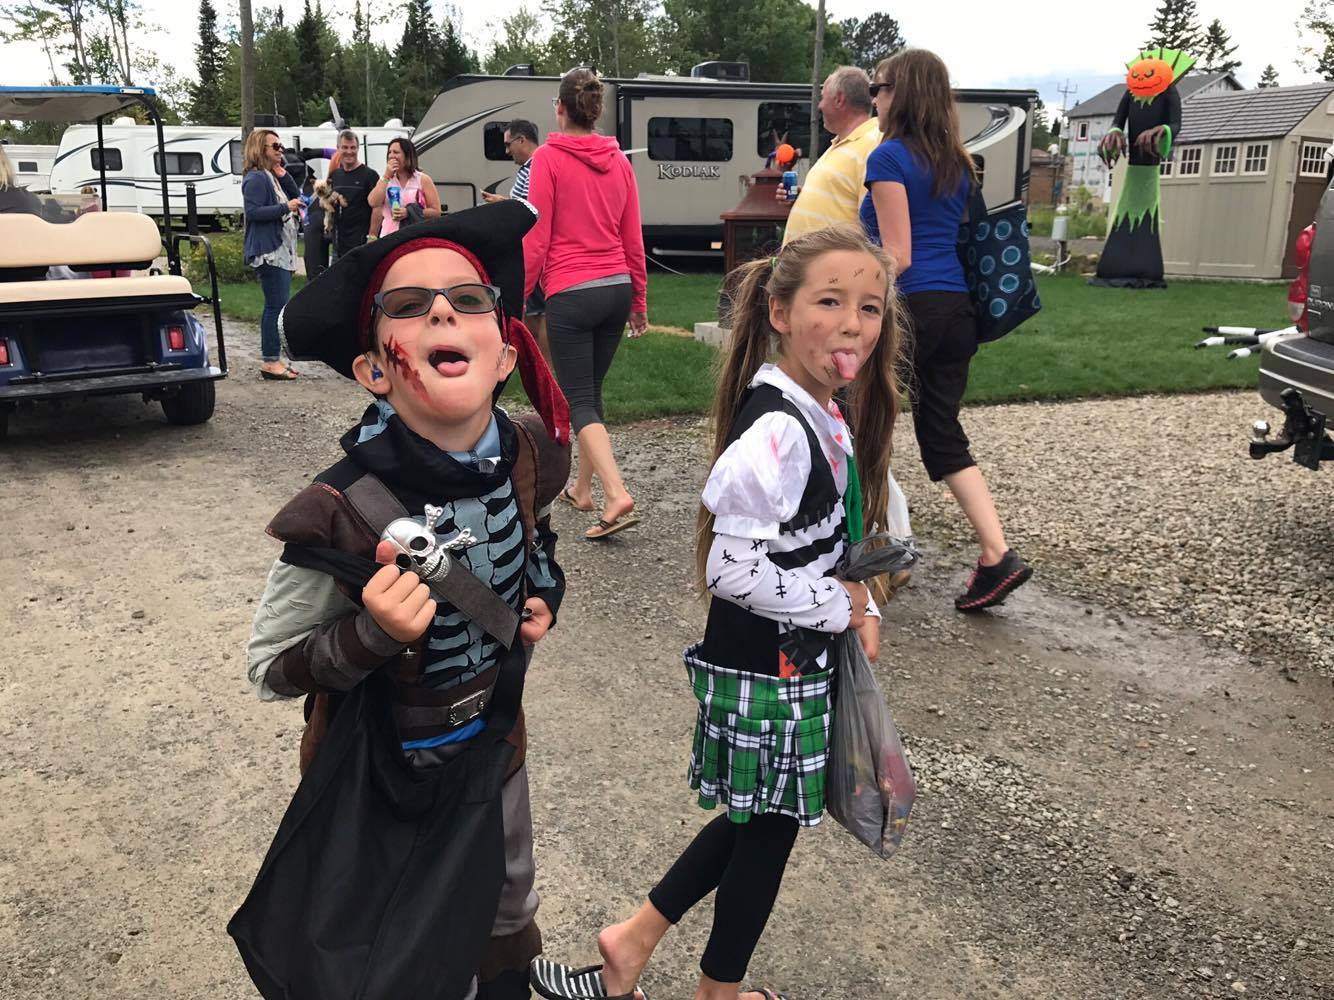 http://www.familycampgrounds.ca/wp-content/uploads/2017/08/halloween-2017-complexe-atlantide-111.jpg